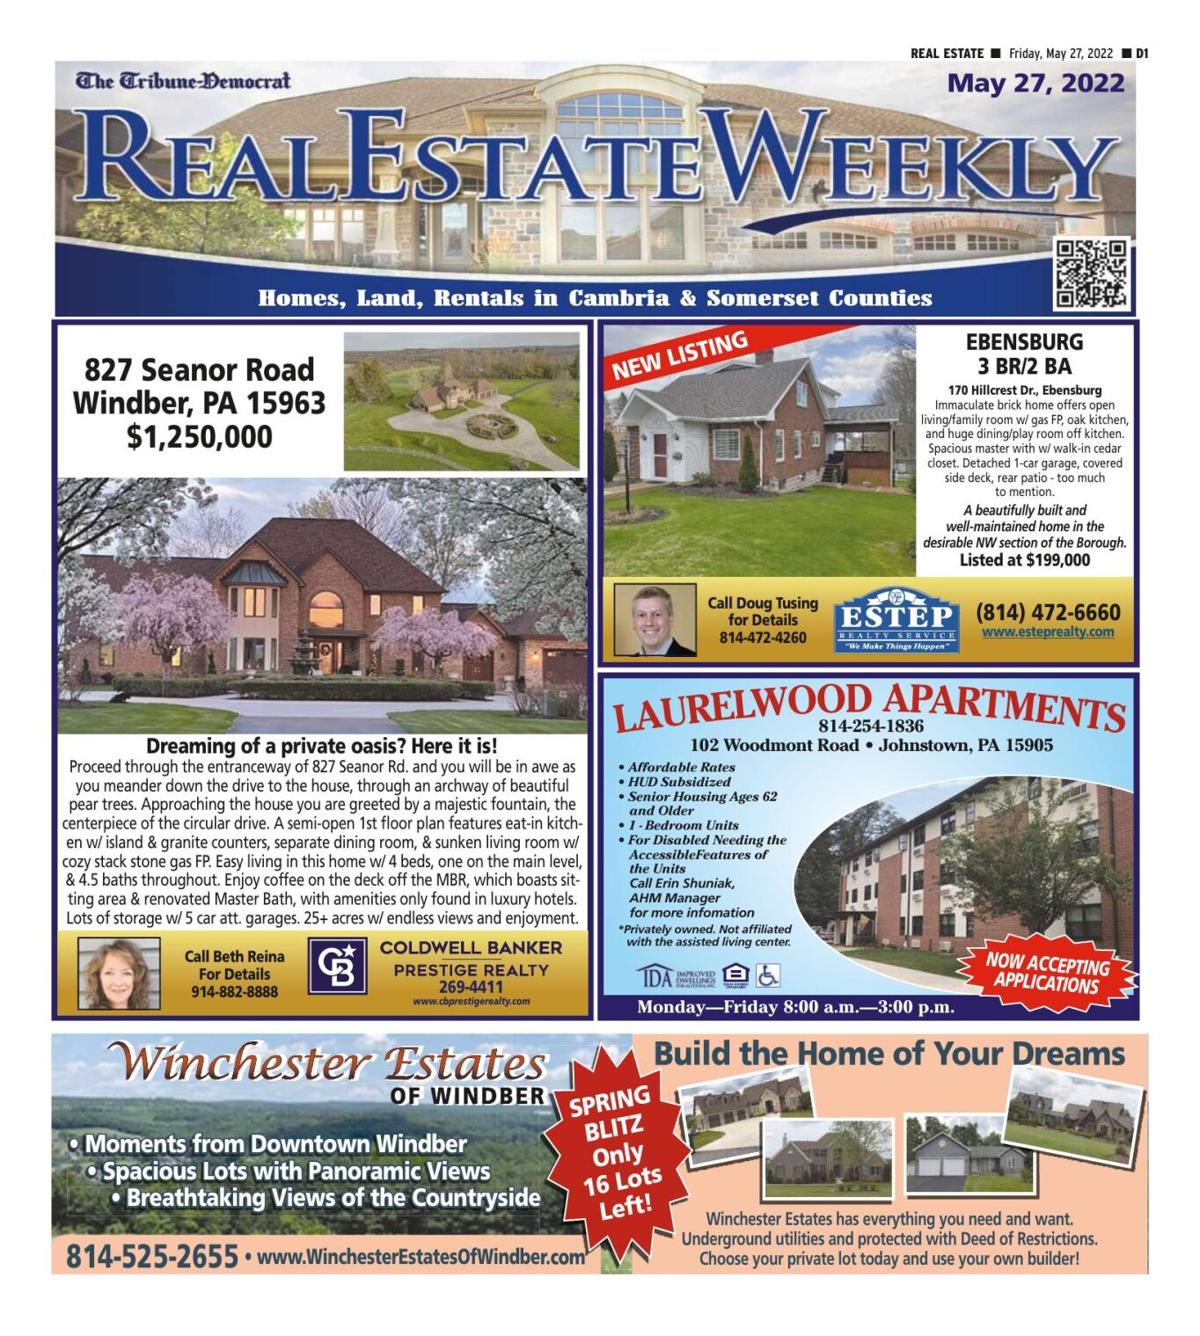 Real Estate Weekely - May 27, 2022